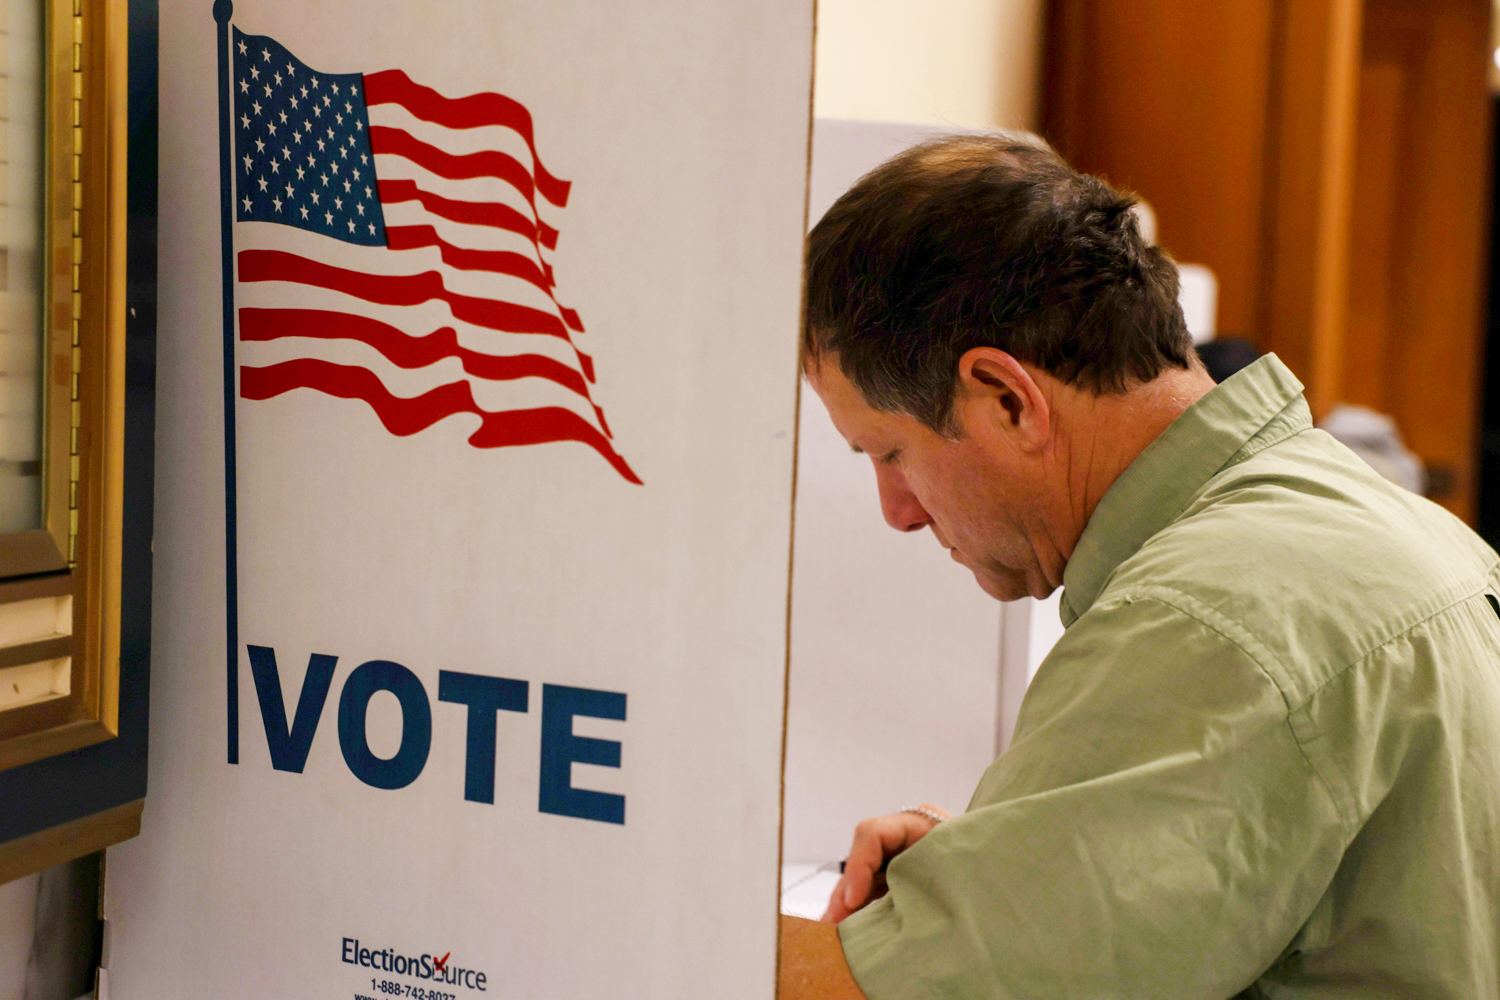 A man is filling out a ballot at a voting booth marked with an American flag and "VOTE."